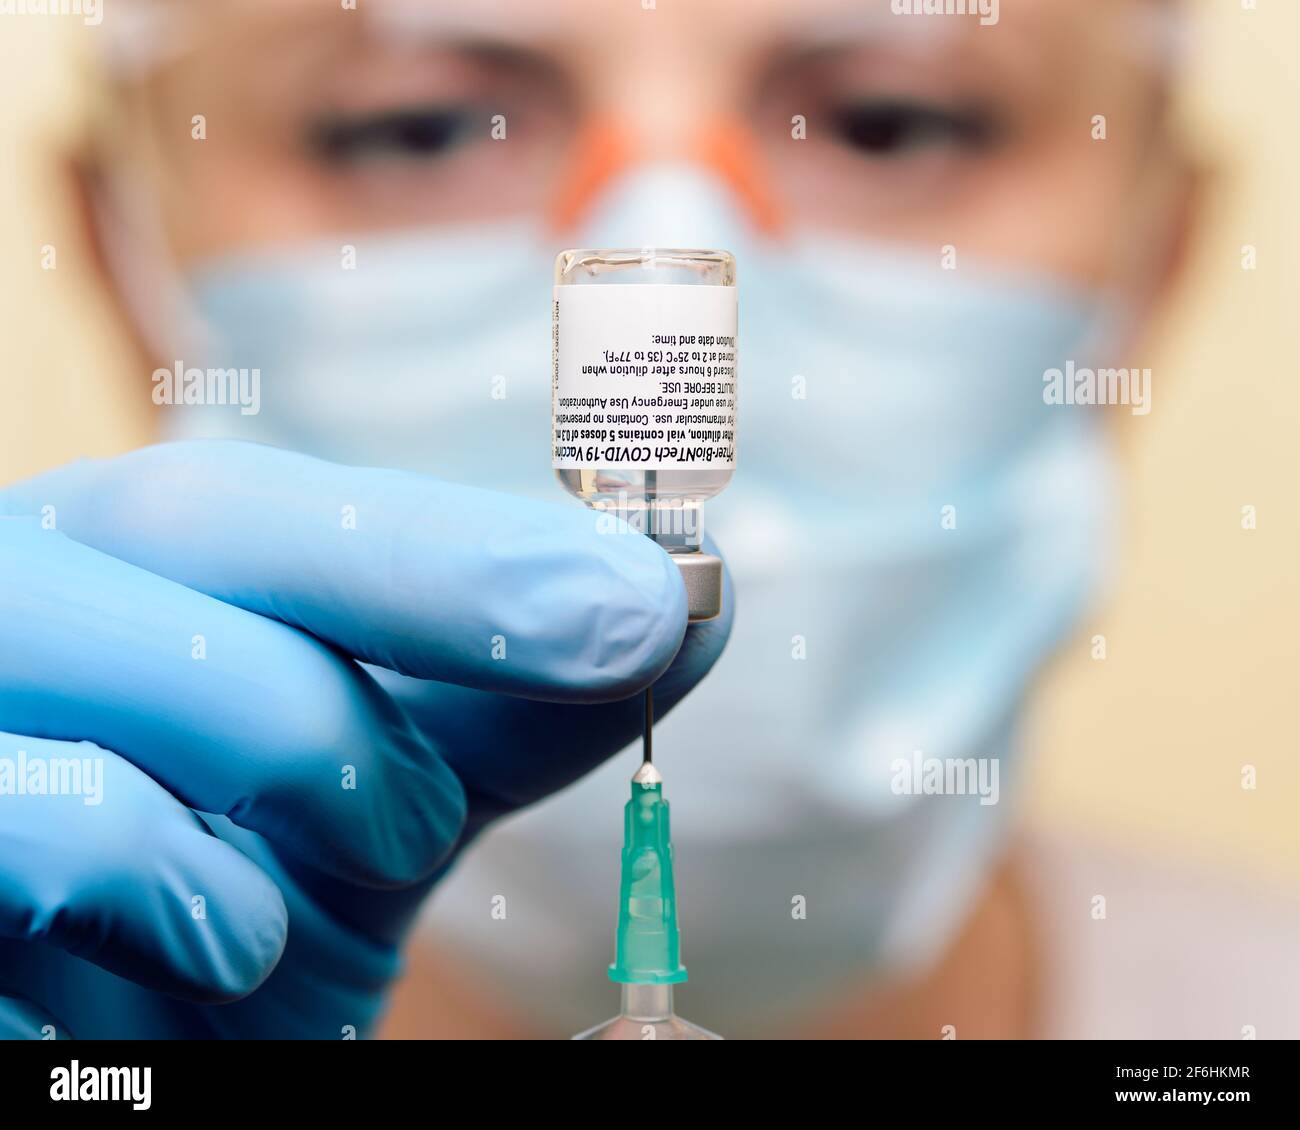 Pfizer BioNTech COVID 19 Vaccine Being Prepared Ready to Vaccinate a Patient. United Kingdom Stock Photo